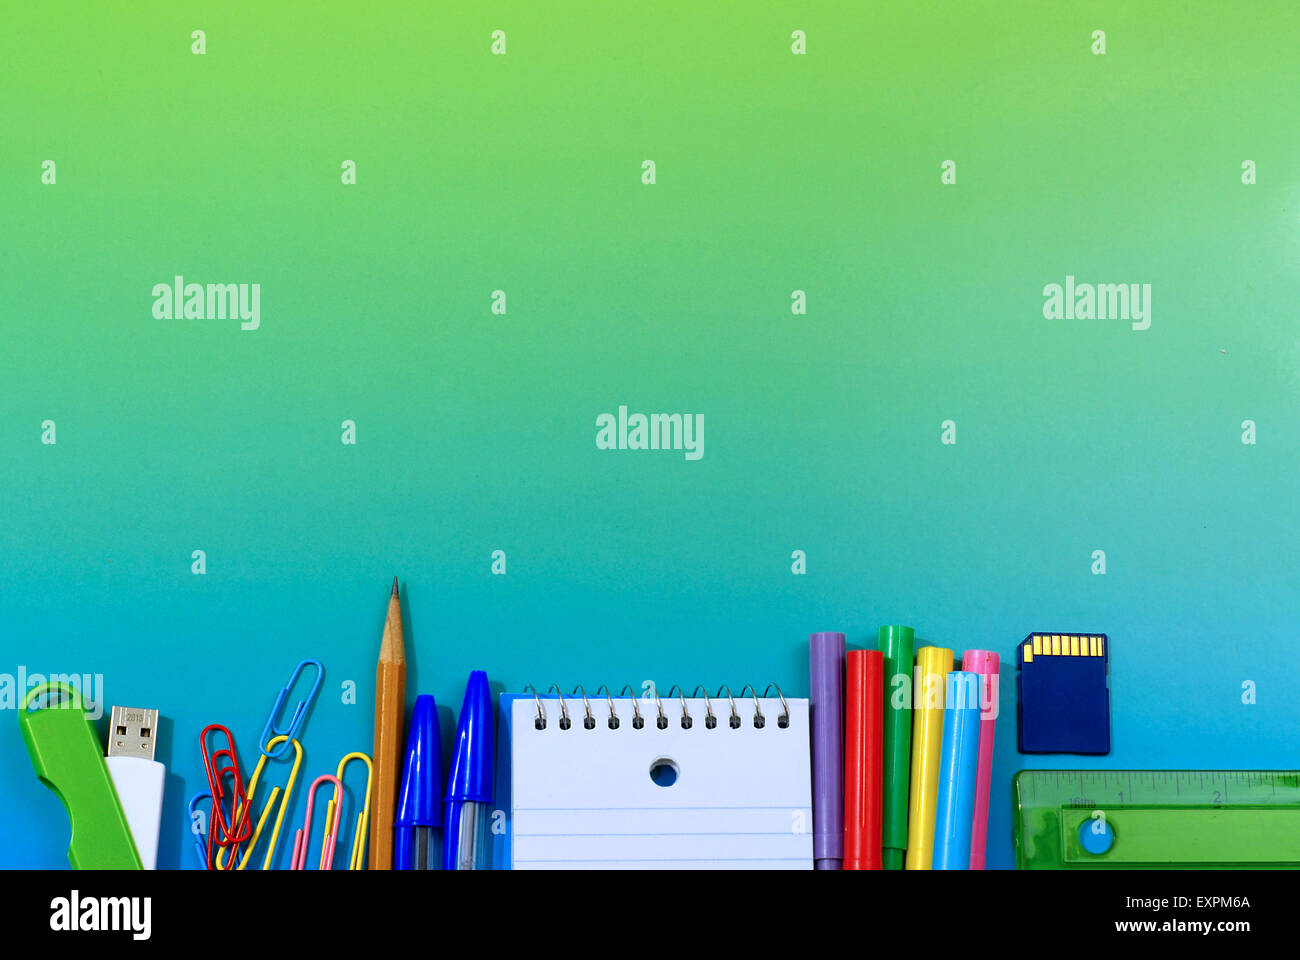 School or office supplies as a low border on a blue green background with copy space Stock Photo